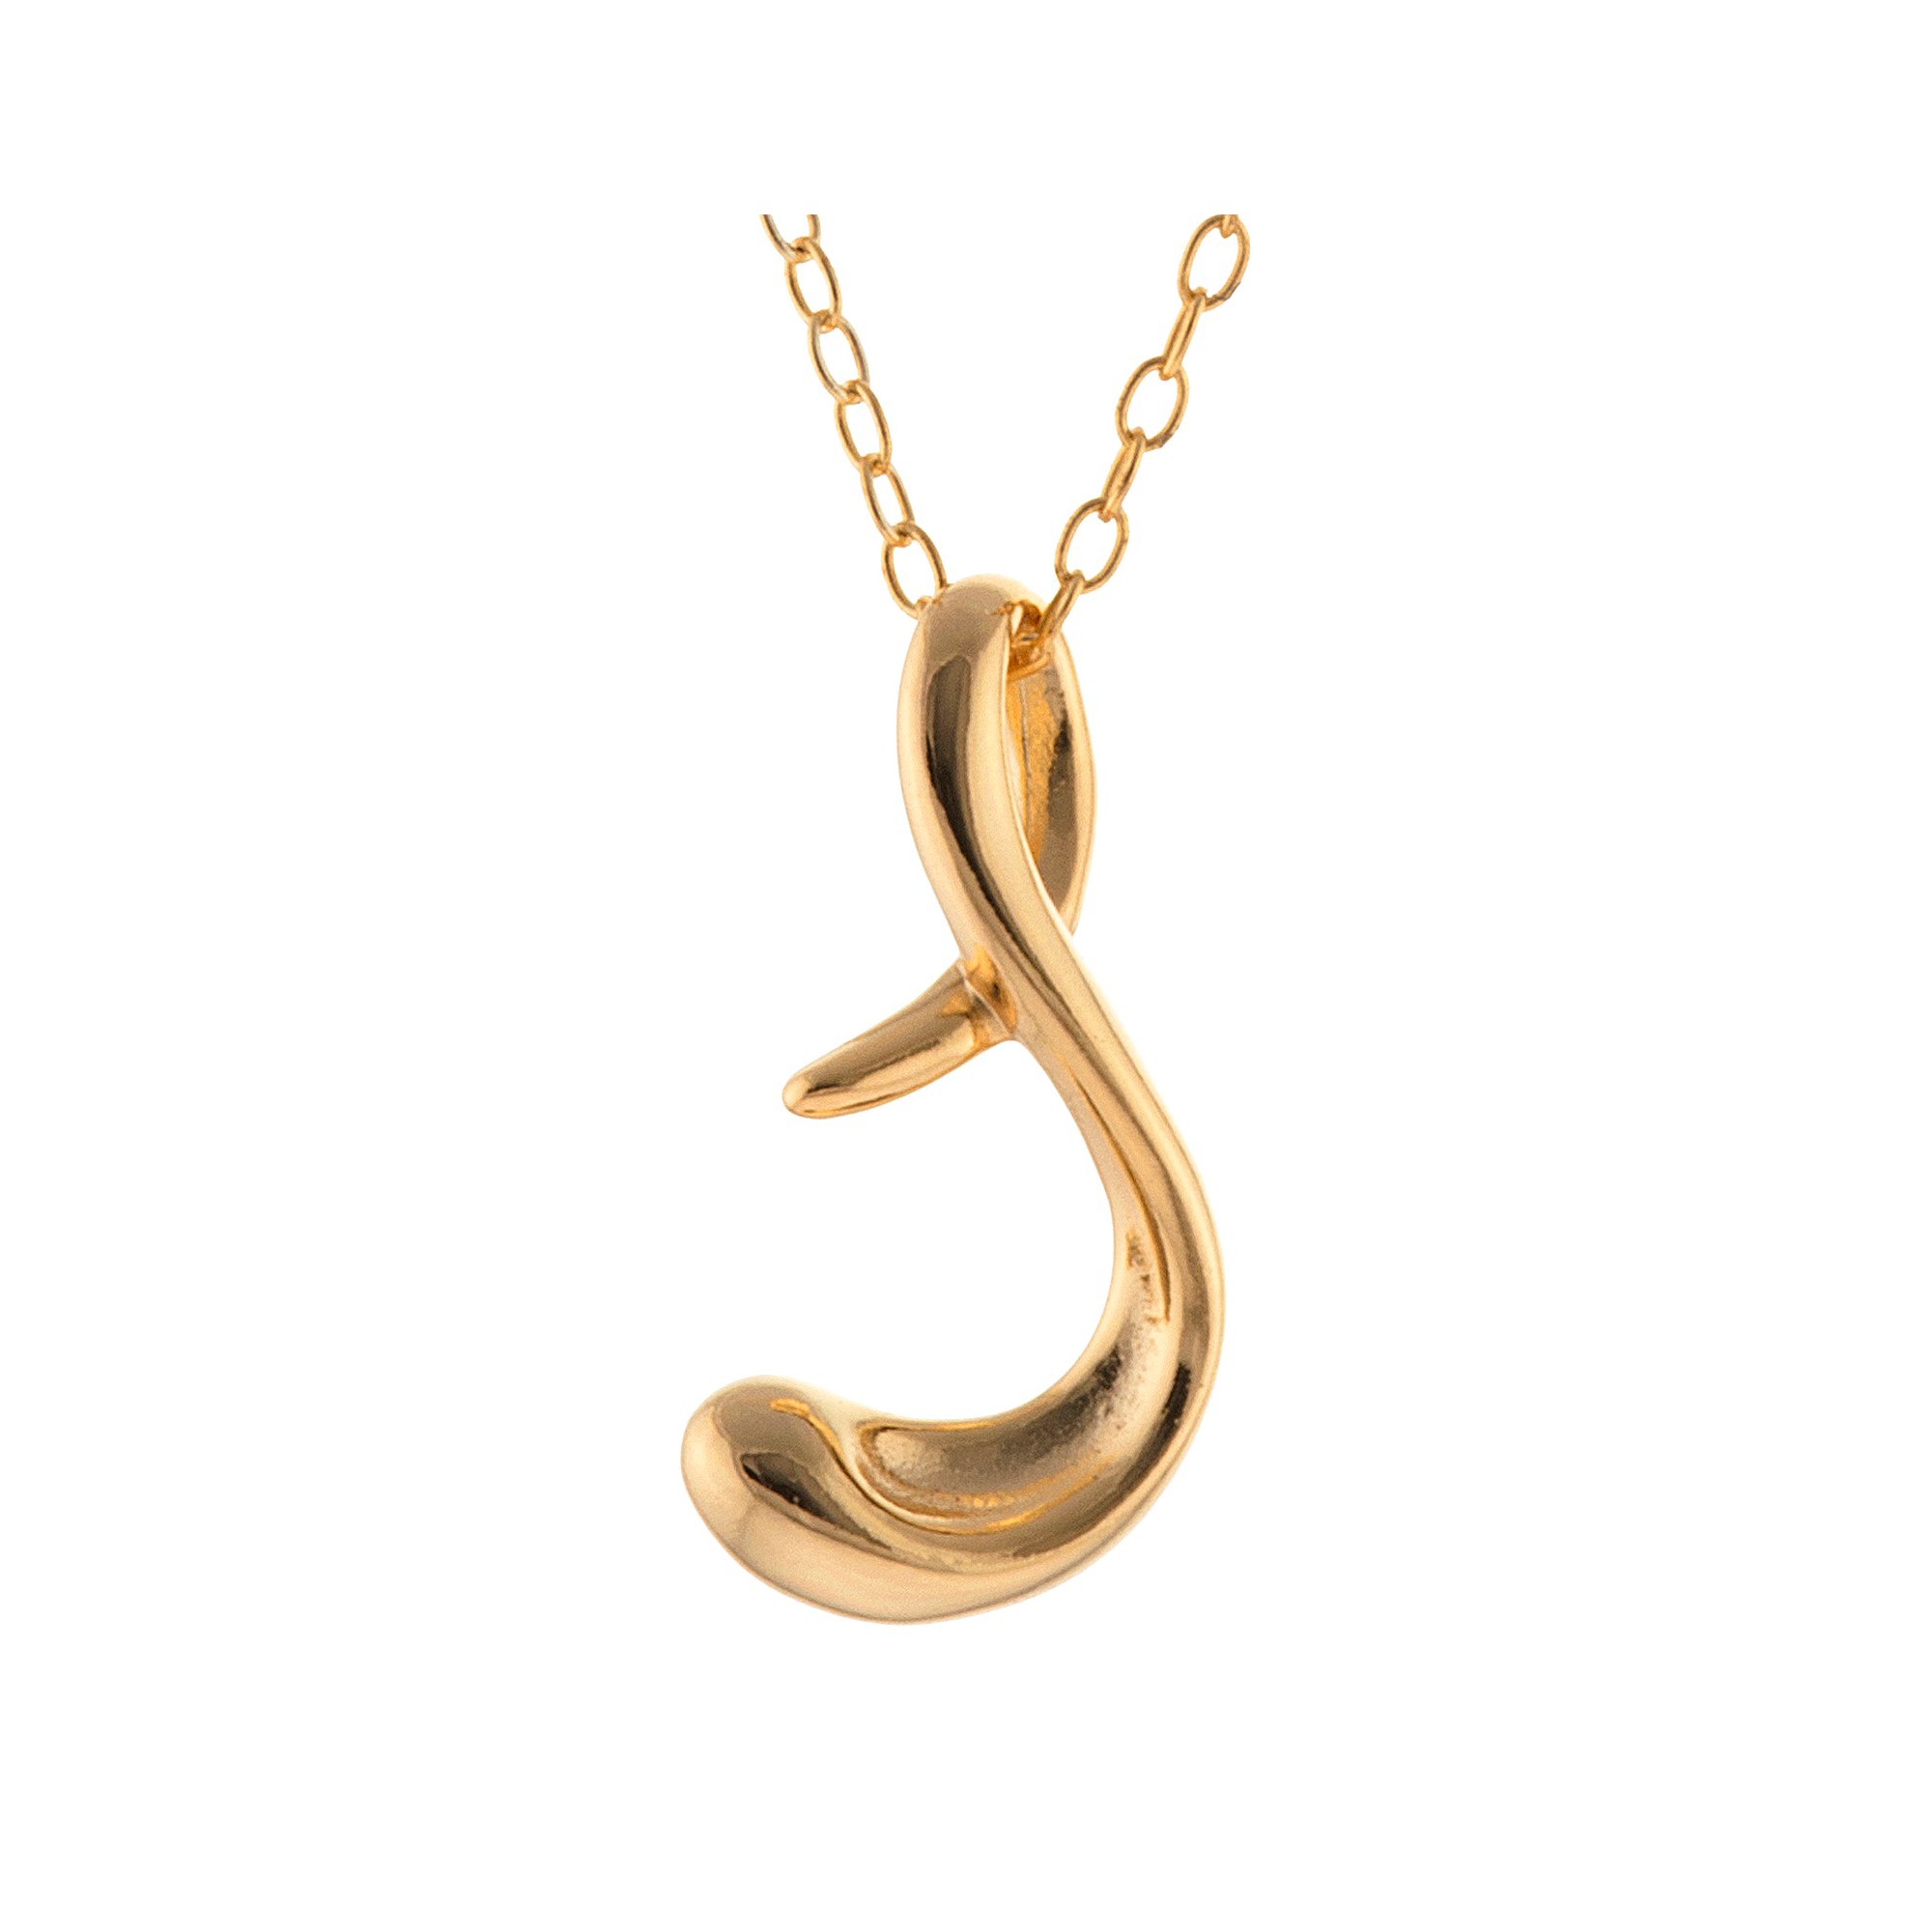 'Women's Gold Plated Letter ''S'' Pendant - Gold (18''), Size: Small'